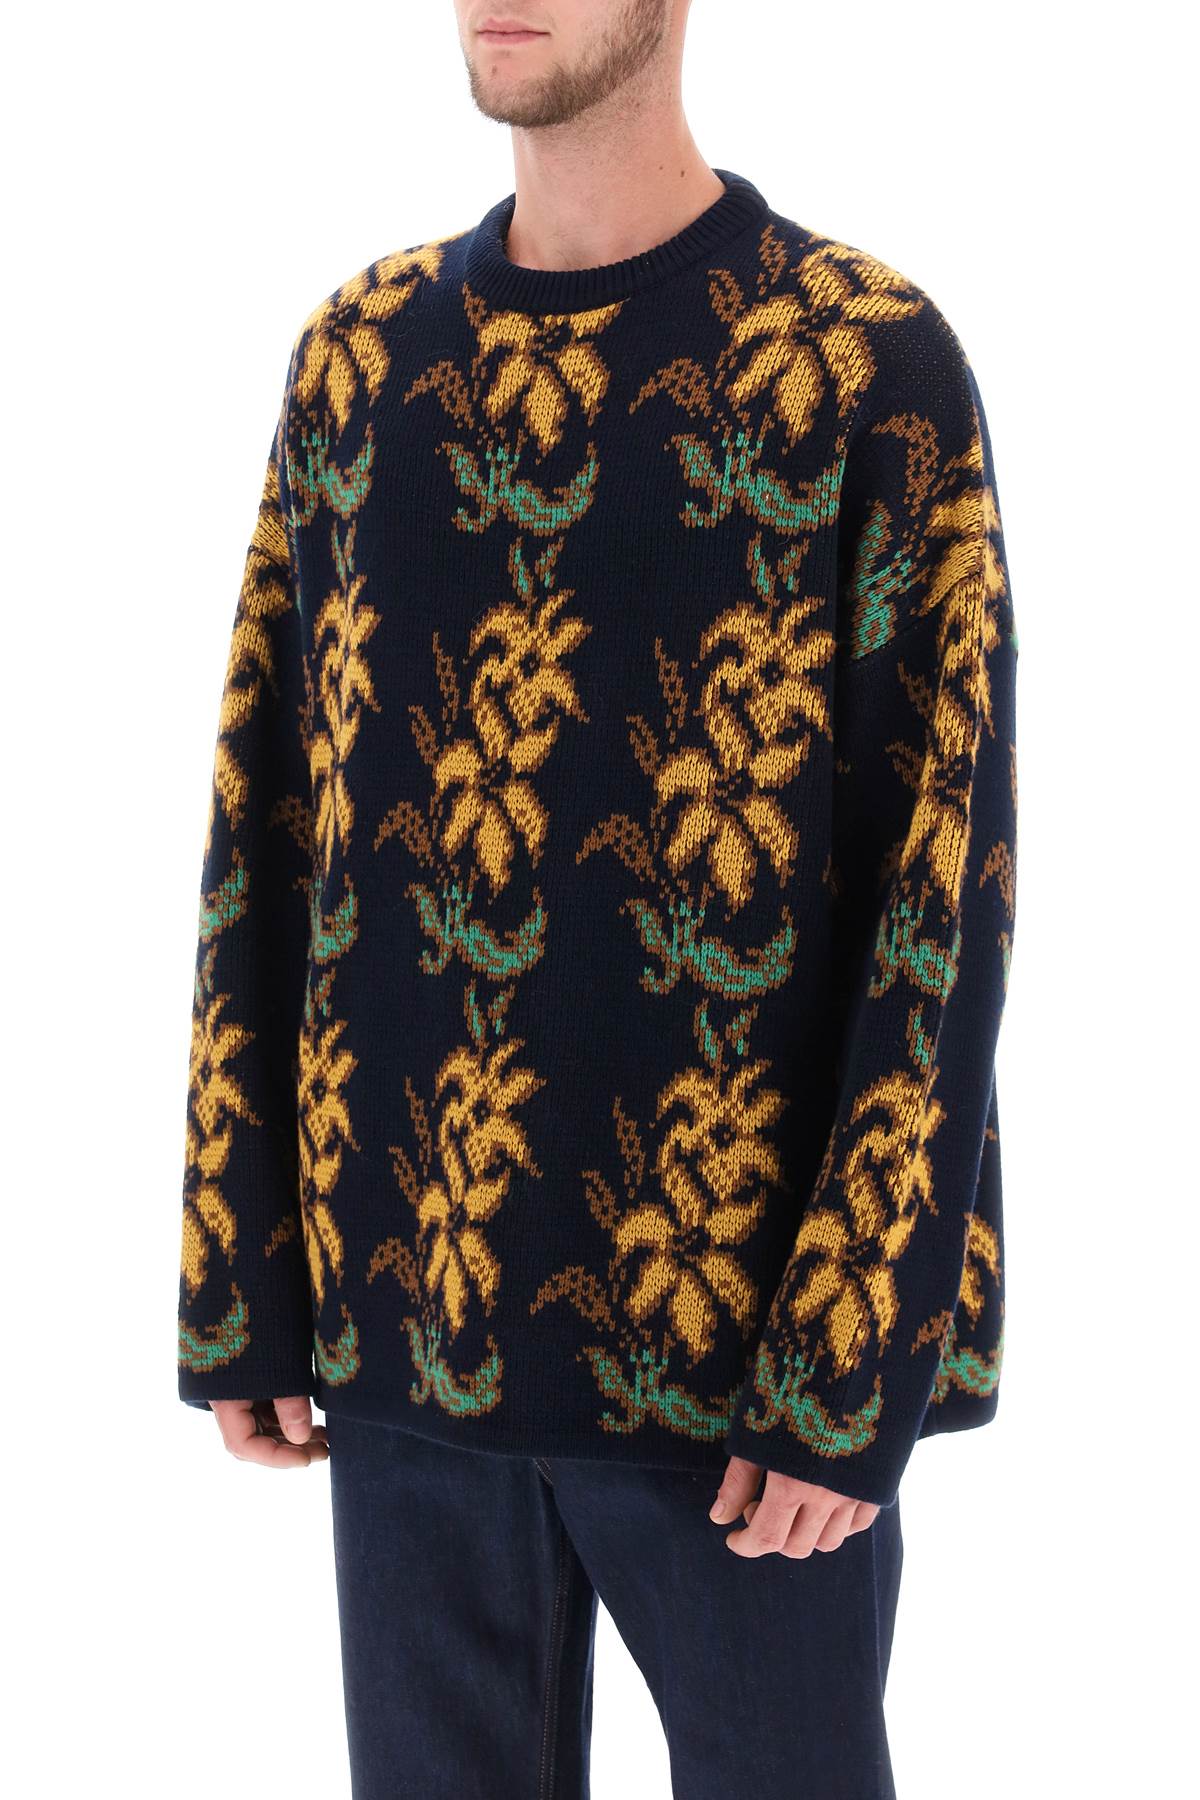 Etro sweater with floral pattern-3